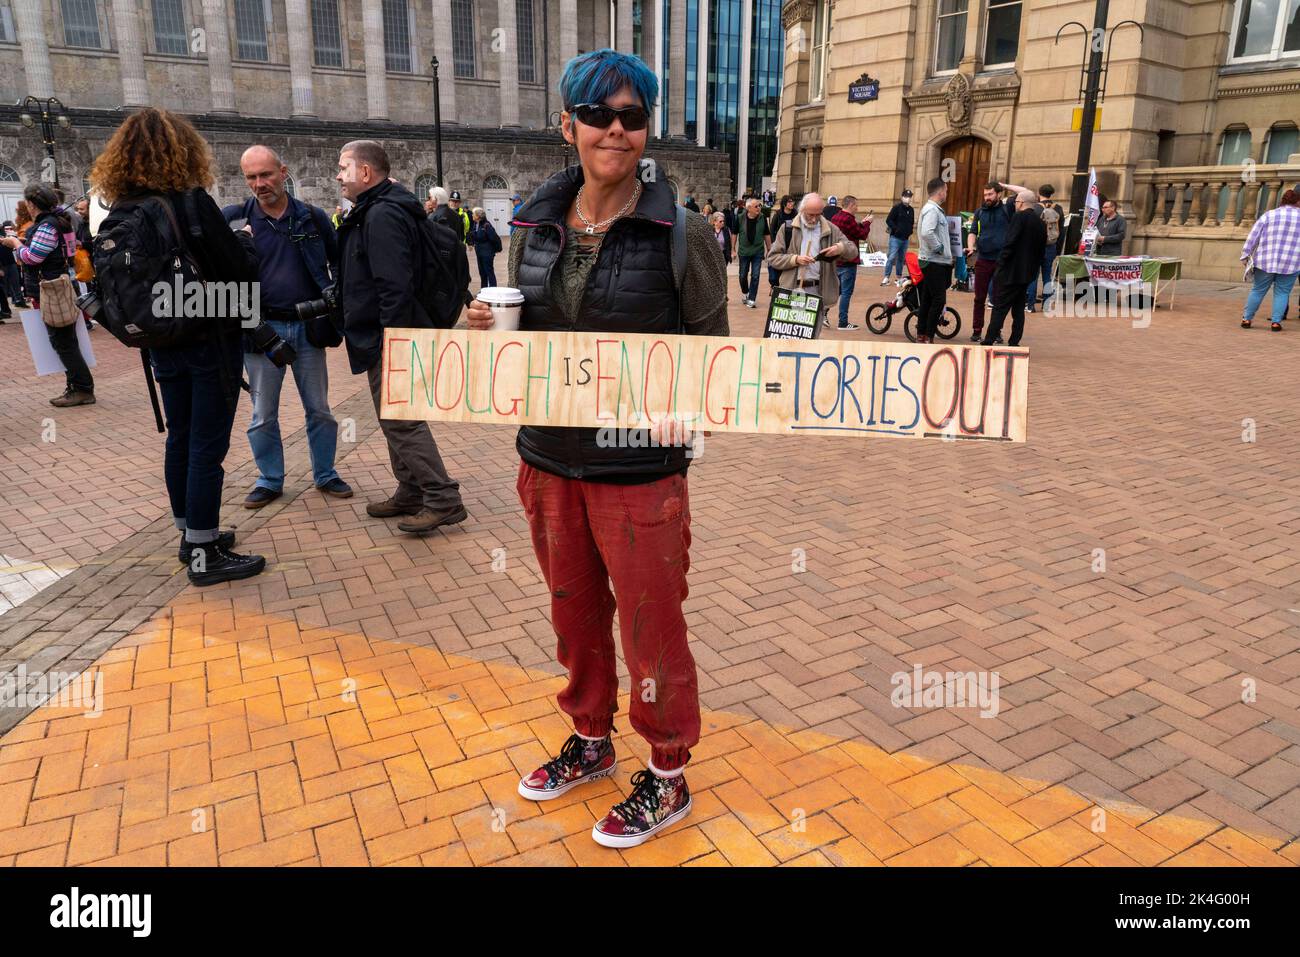 Birmingham, UK. 2nd Oct, 2022. Thousands of people rallied in Victoria Square at a rally organised by The People's Assembly to protest against the new conservative governments new measures, they marched through the city center before rallying outsode the Tory Conference center, the mood was angry and loud. Credit: Natasha Quarmby/Alamy Live News Stock Photo